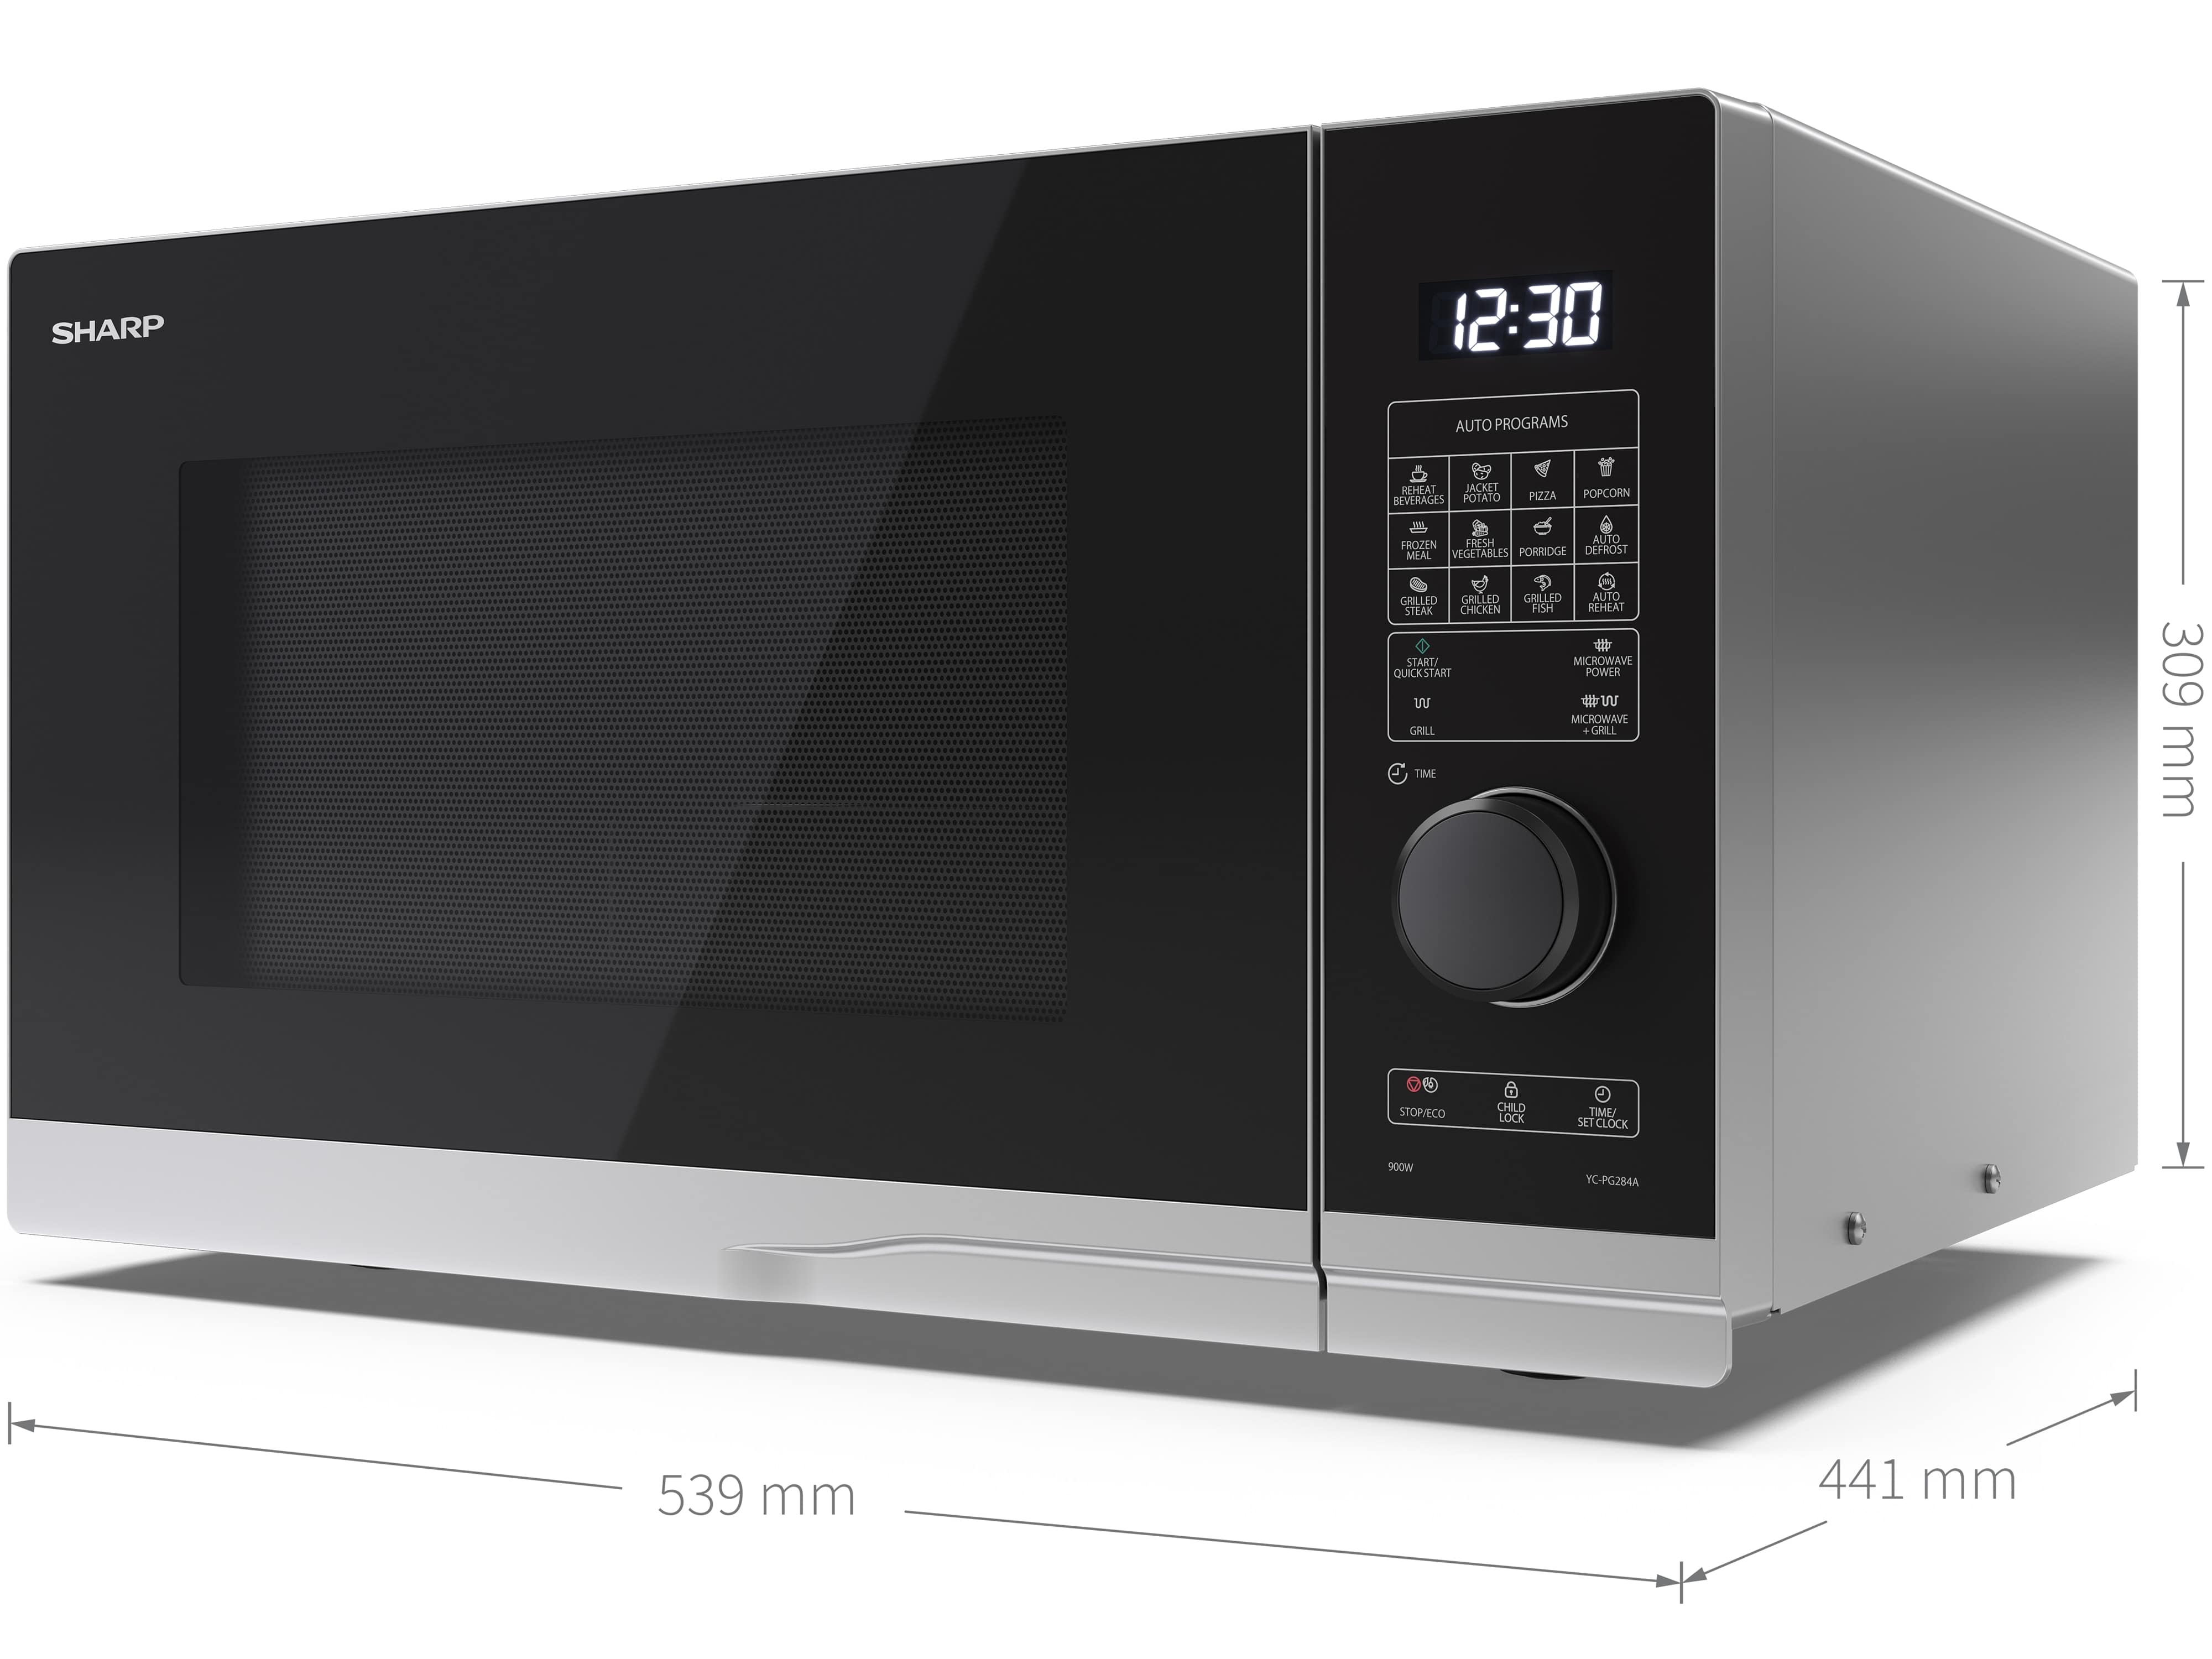 SHARP Mikrowelle YC-PG234AE-S, silber, mit Grill, 23 L, 900 W